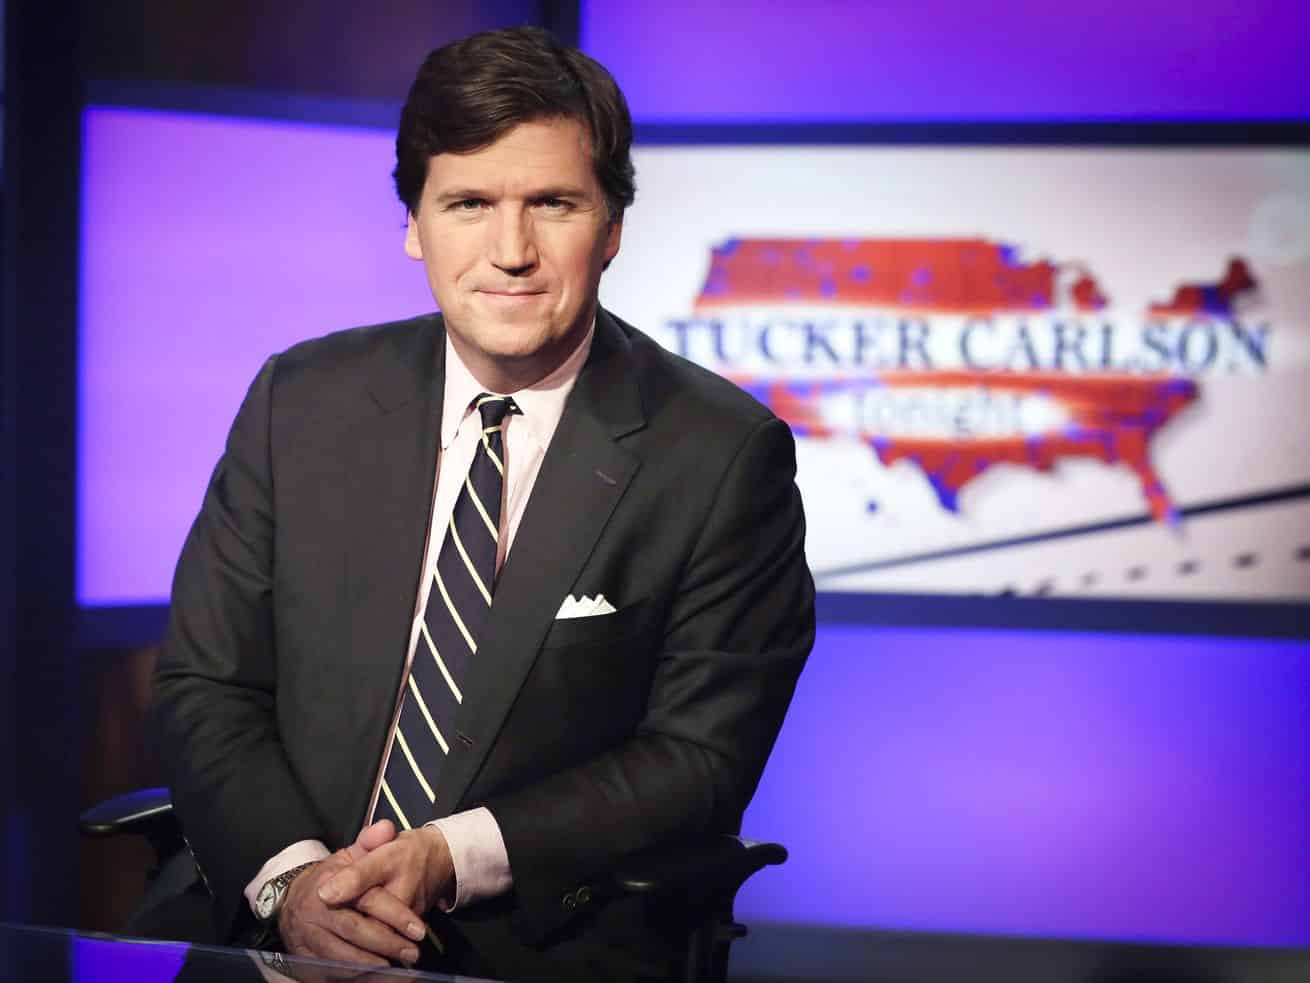 Why it matters that Tucker Carlson is broadcasting from Hungary this week